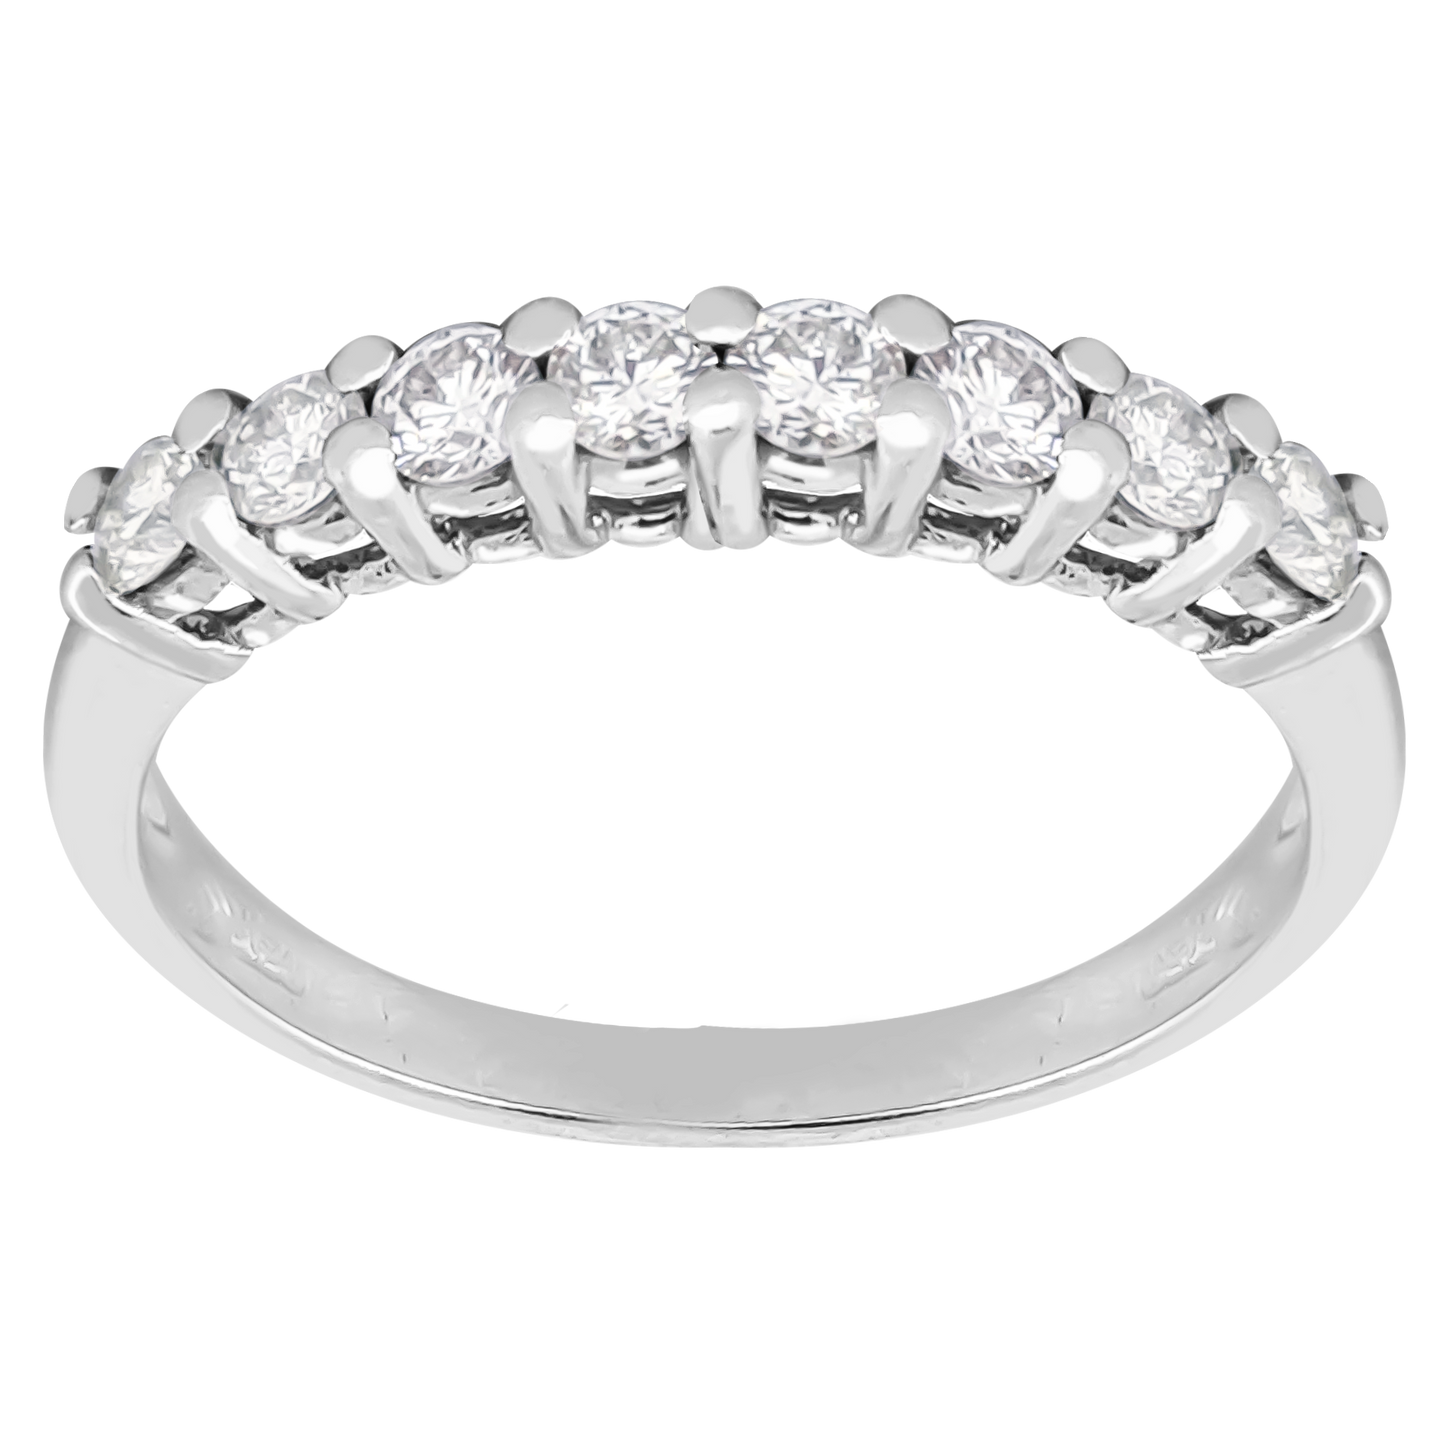 Perfect Pair 0.50ct Diamond Eternity Ring in 18ct White Gold